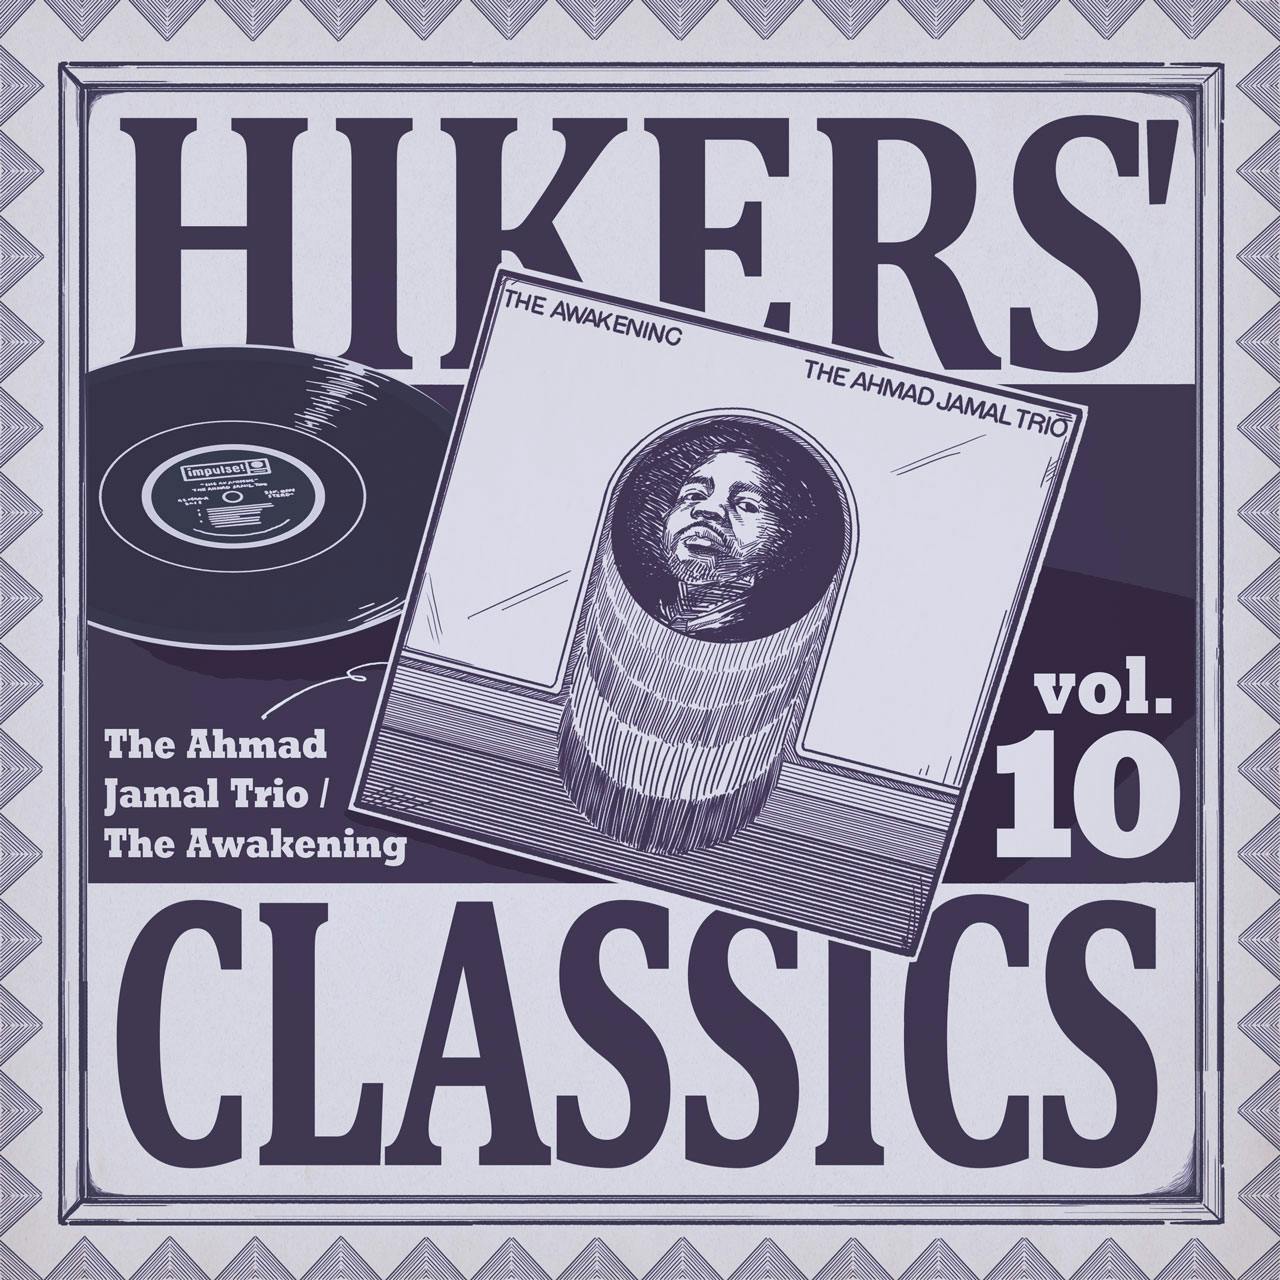 HIKERS’ CLASSICS #10<br>上野裕樹（山と道HLC東北アンバサダー／Knotty）